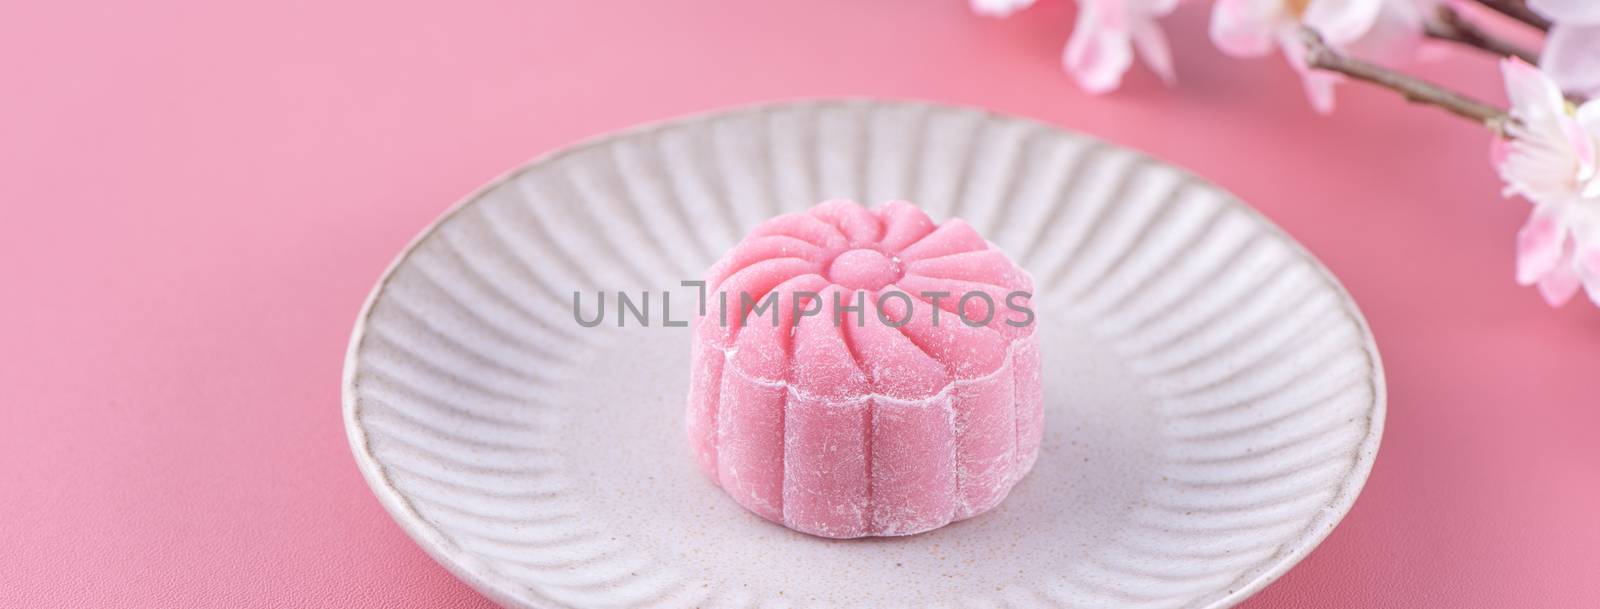 Colorful snow skin moon cake, sweet snowy mooncake, traditional savory dessert for Mid-Autumn Festival on pastel pale pink background, close up.